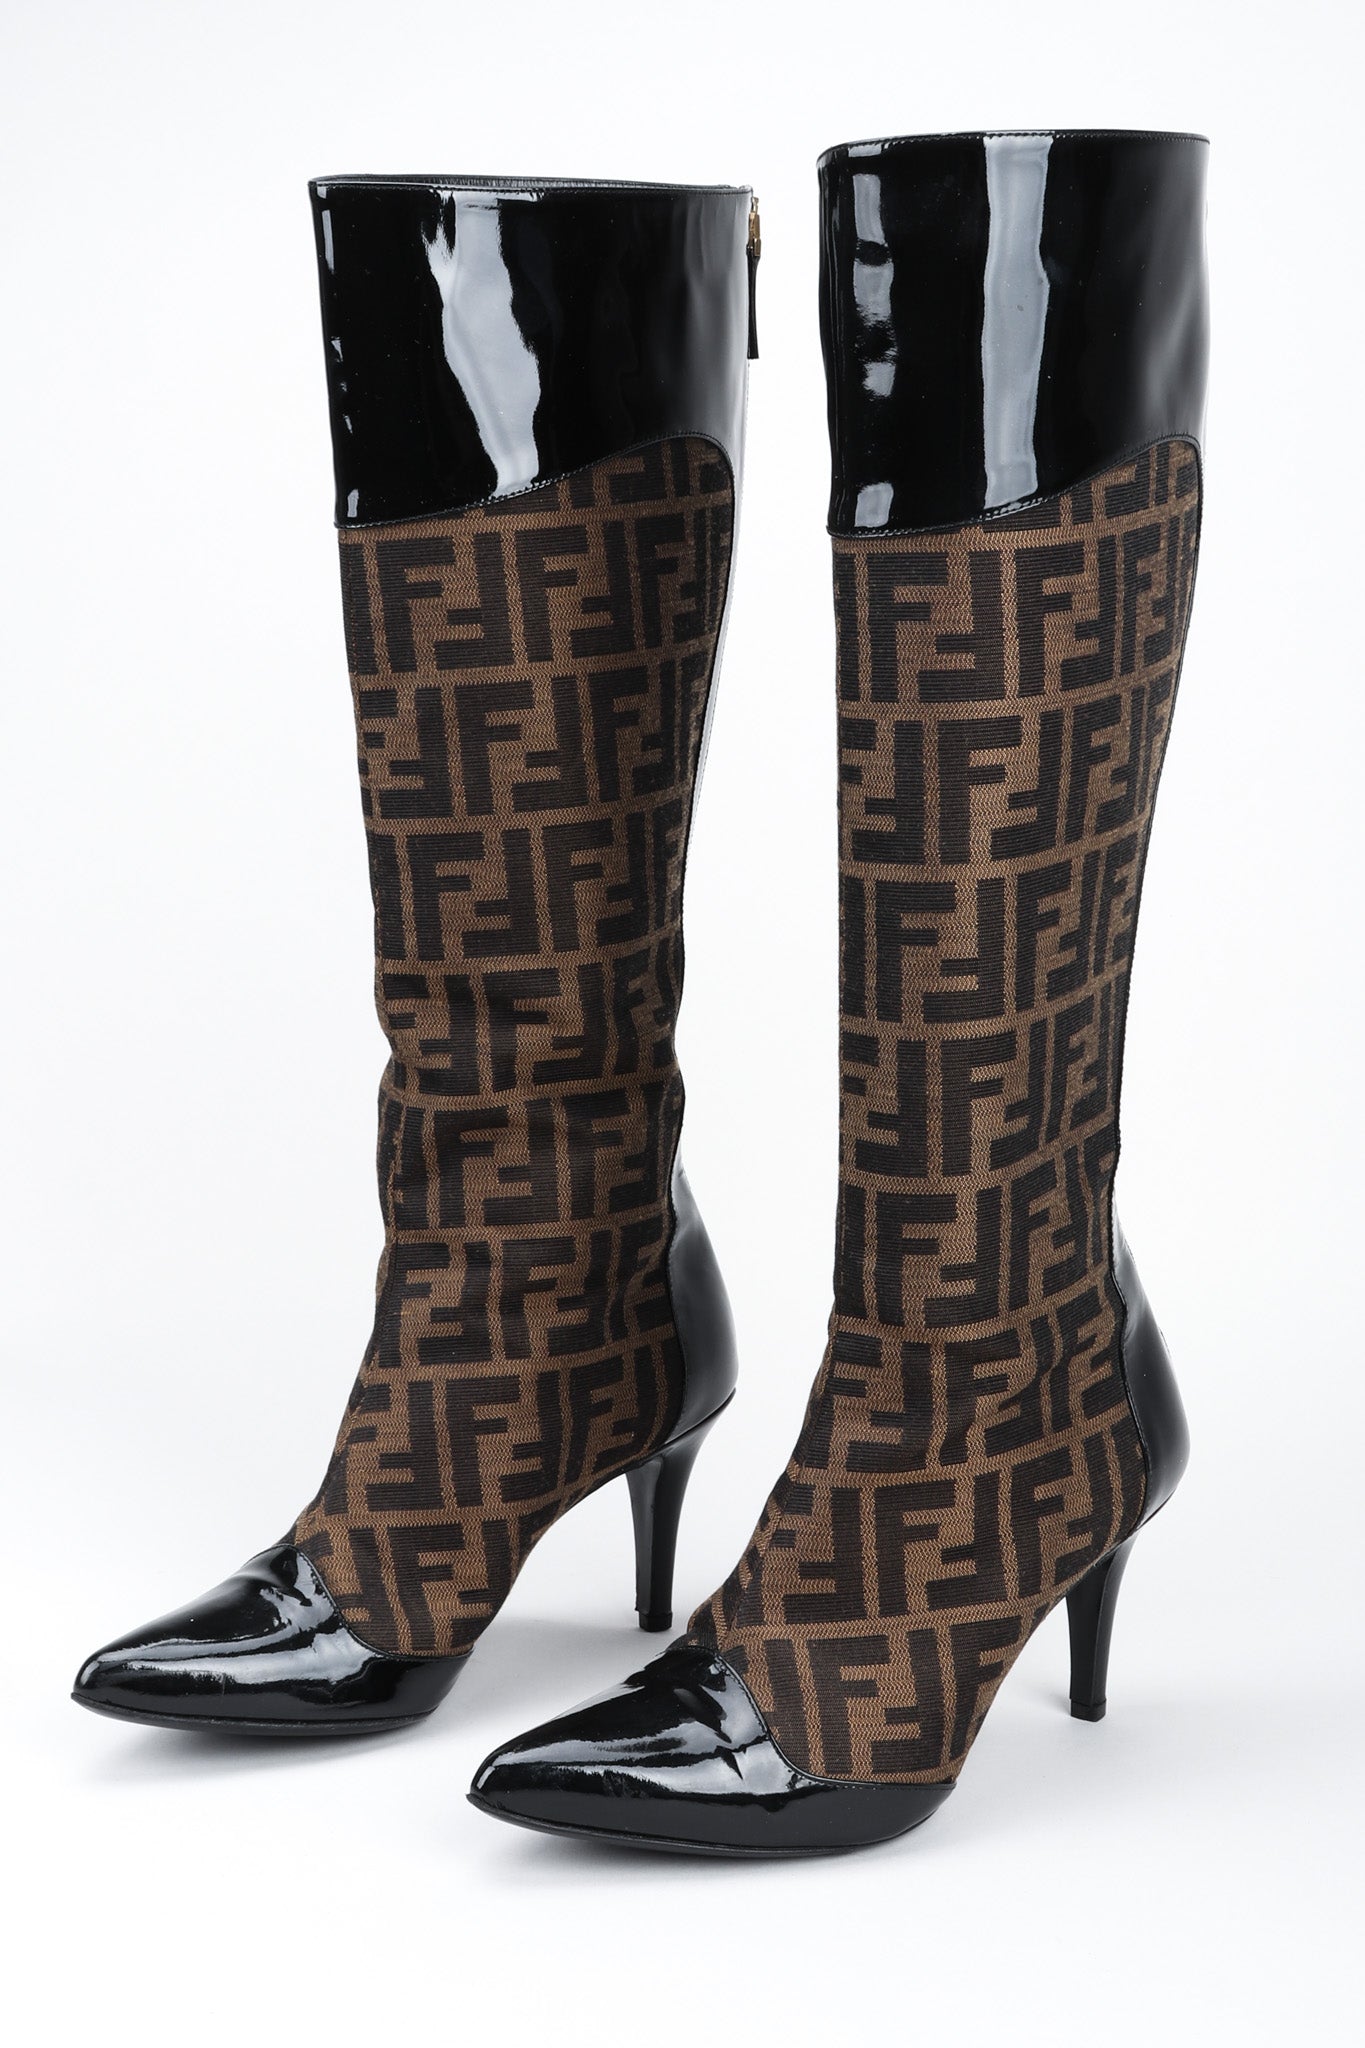 Recess Los Angeles Vintage Fendi Zucca Double F Monogram Patent Leather Trim Boots Pointed Toe